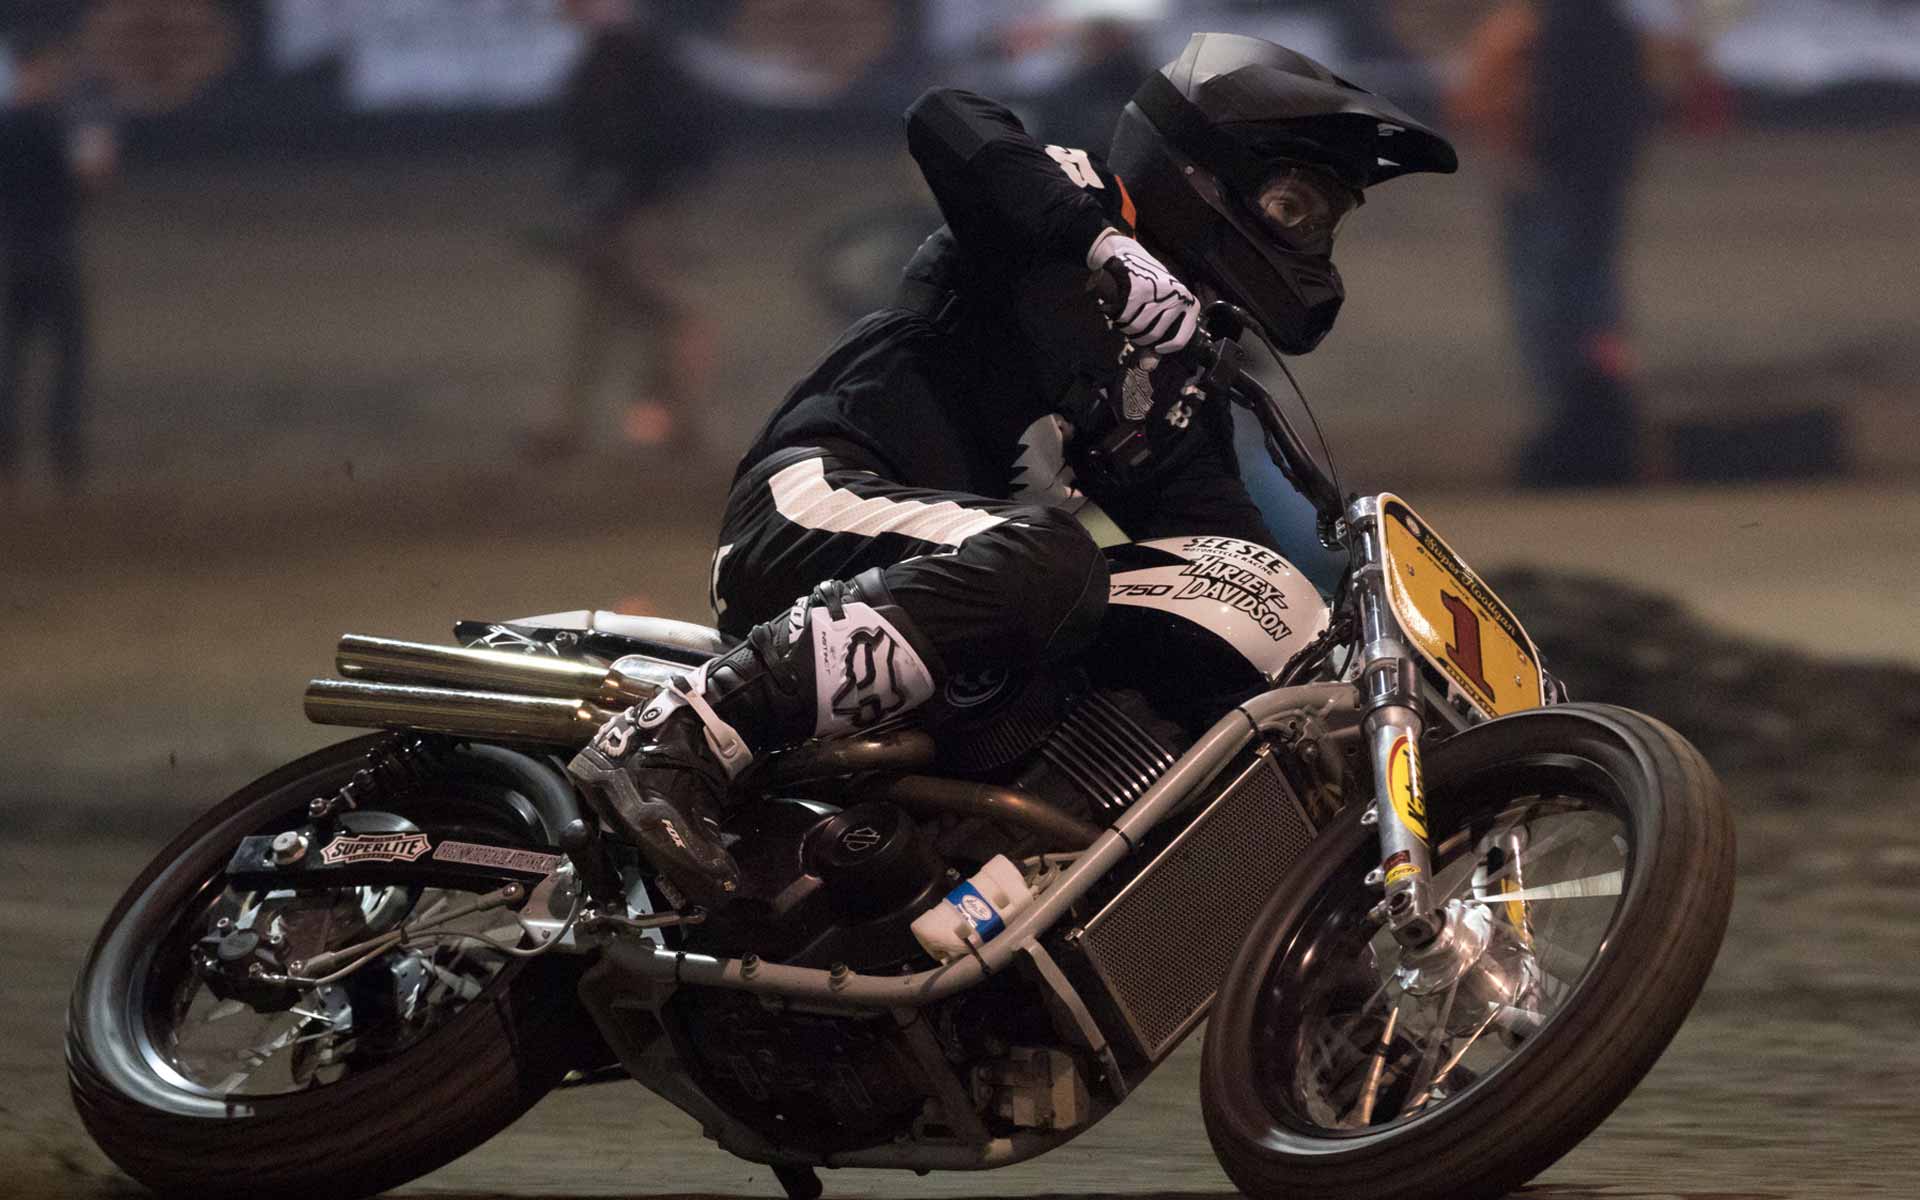 Andy DiBrino defending his #1 plate at Salem flat track RSD Super Hooligan first race at the One Pro Motorcycle Show